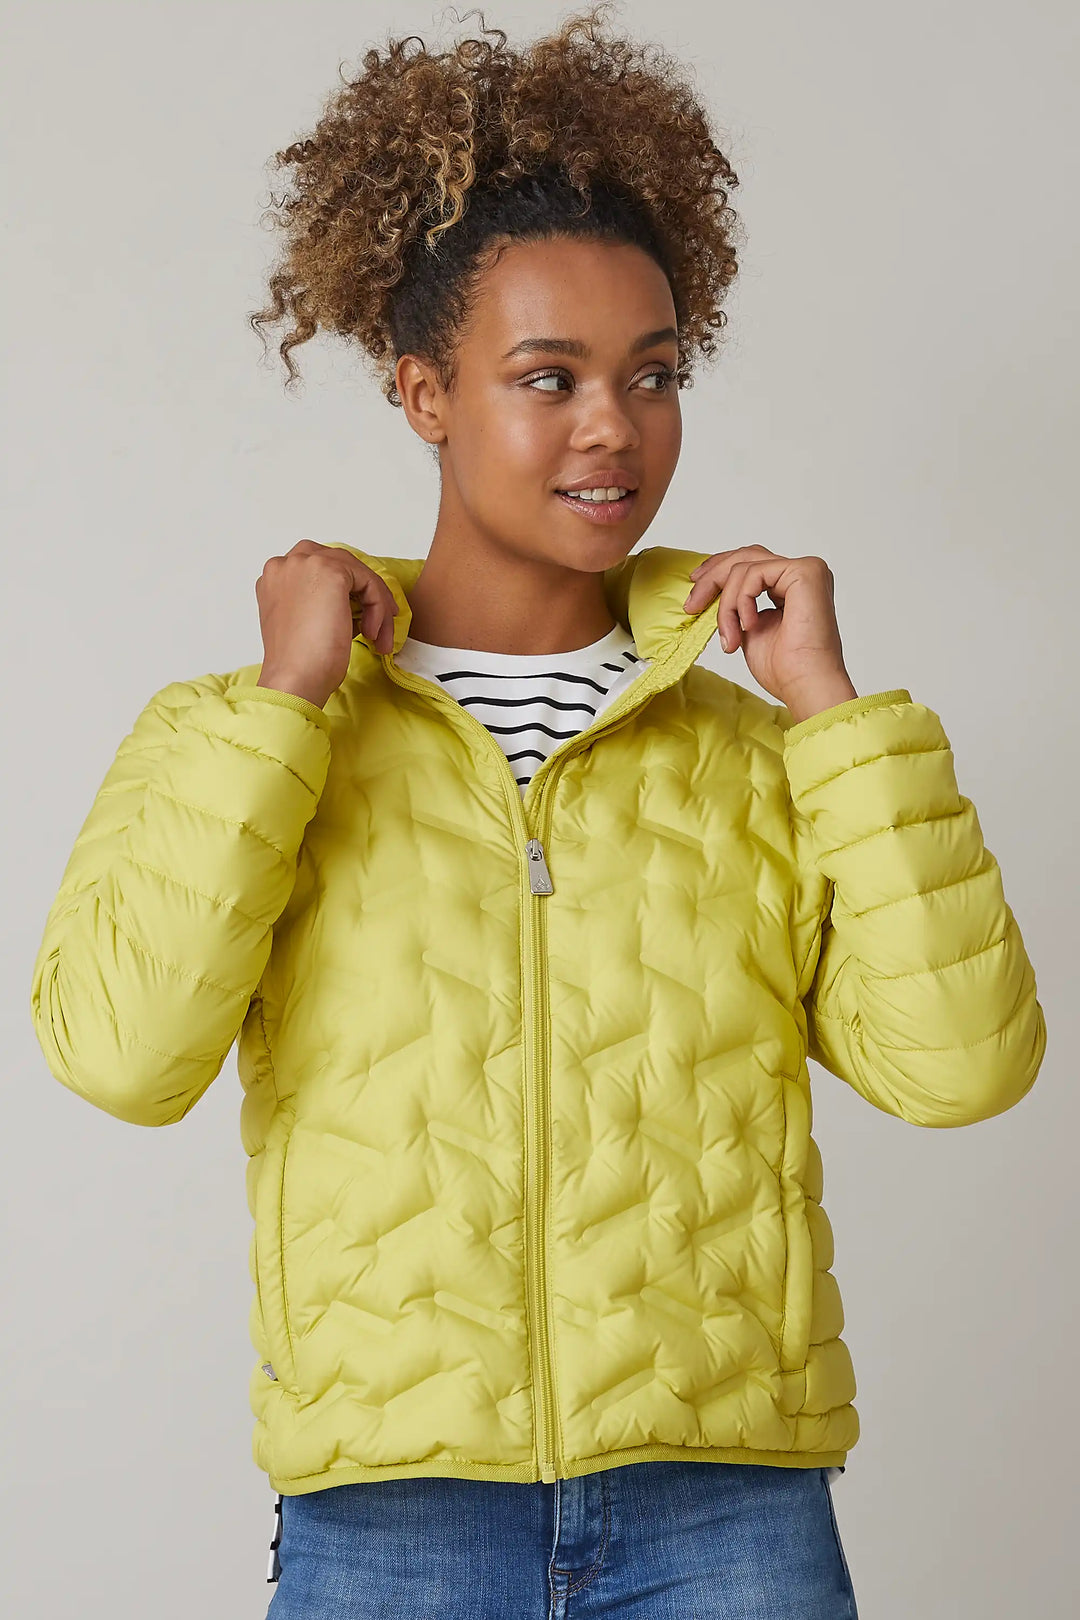 Model sporting a bright yellow quilted jacket with a front zipper, paired with a striped top underneath, looking to the side with a thoughtful expression, style  0124-2450-63-55